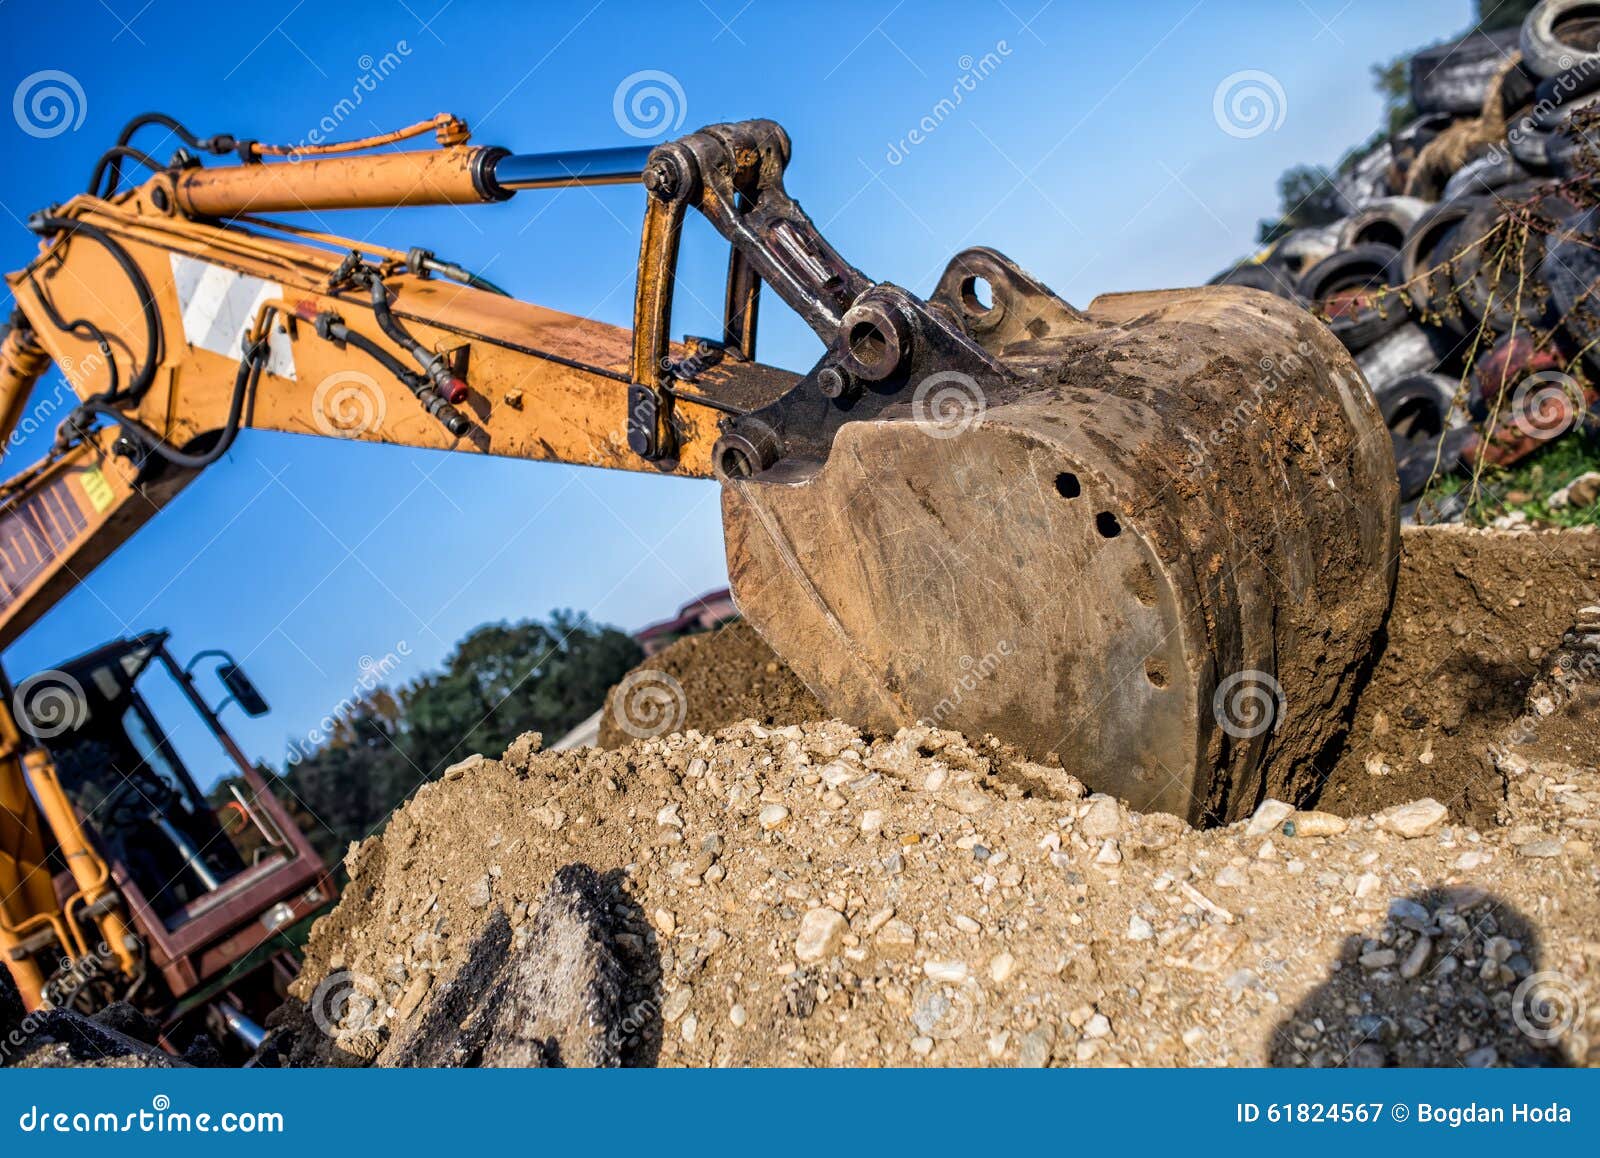 demolishing operations at industrial construction site. worker using bulldozer wrecking